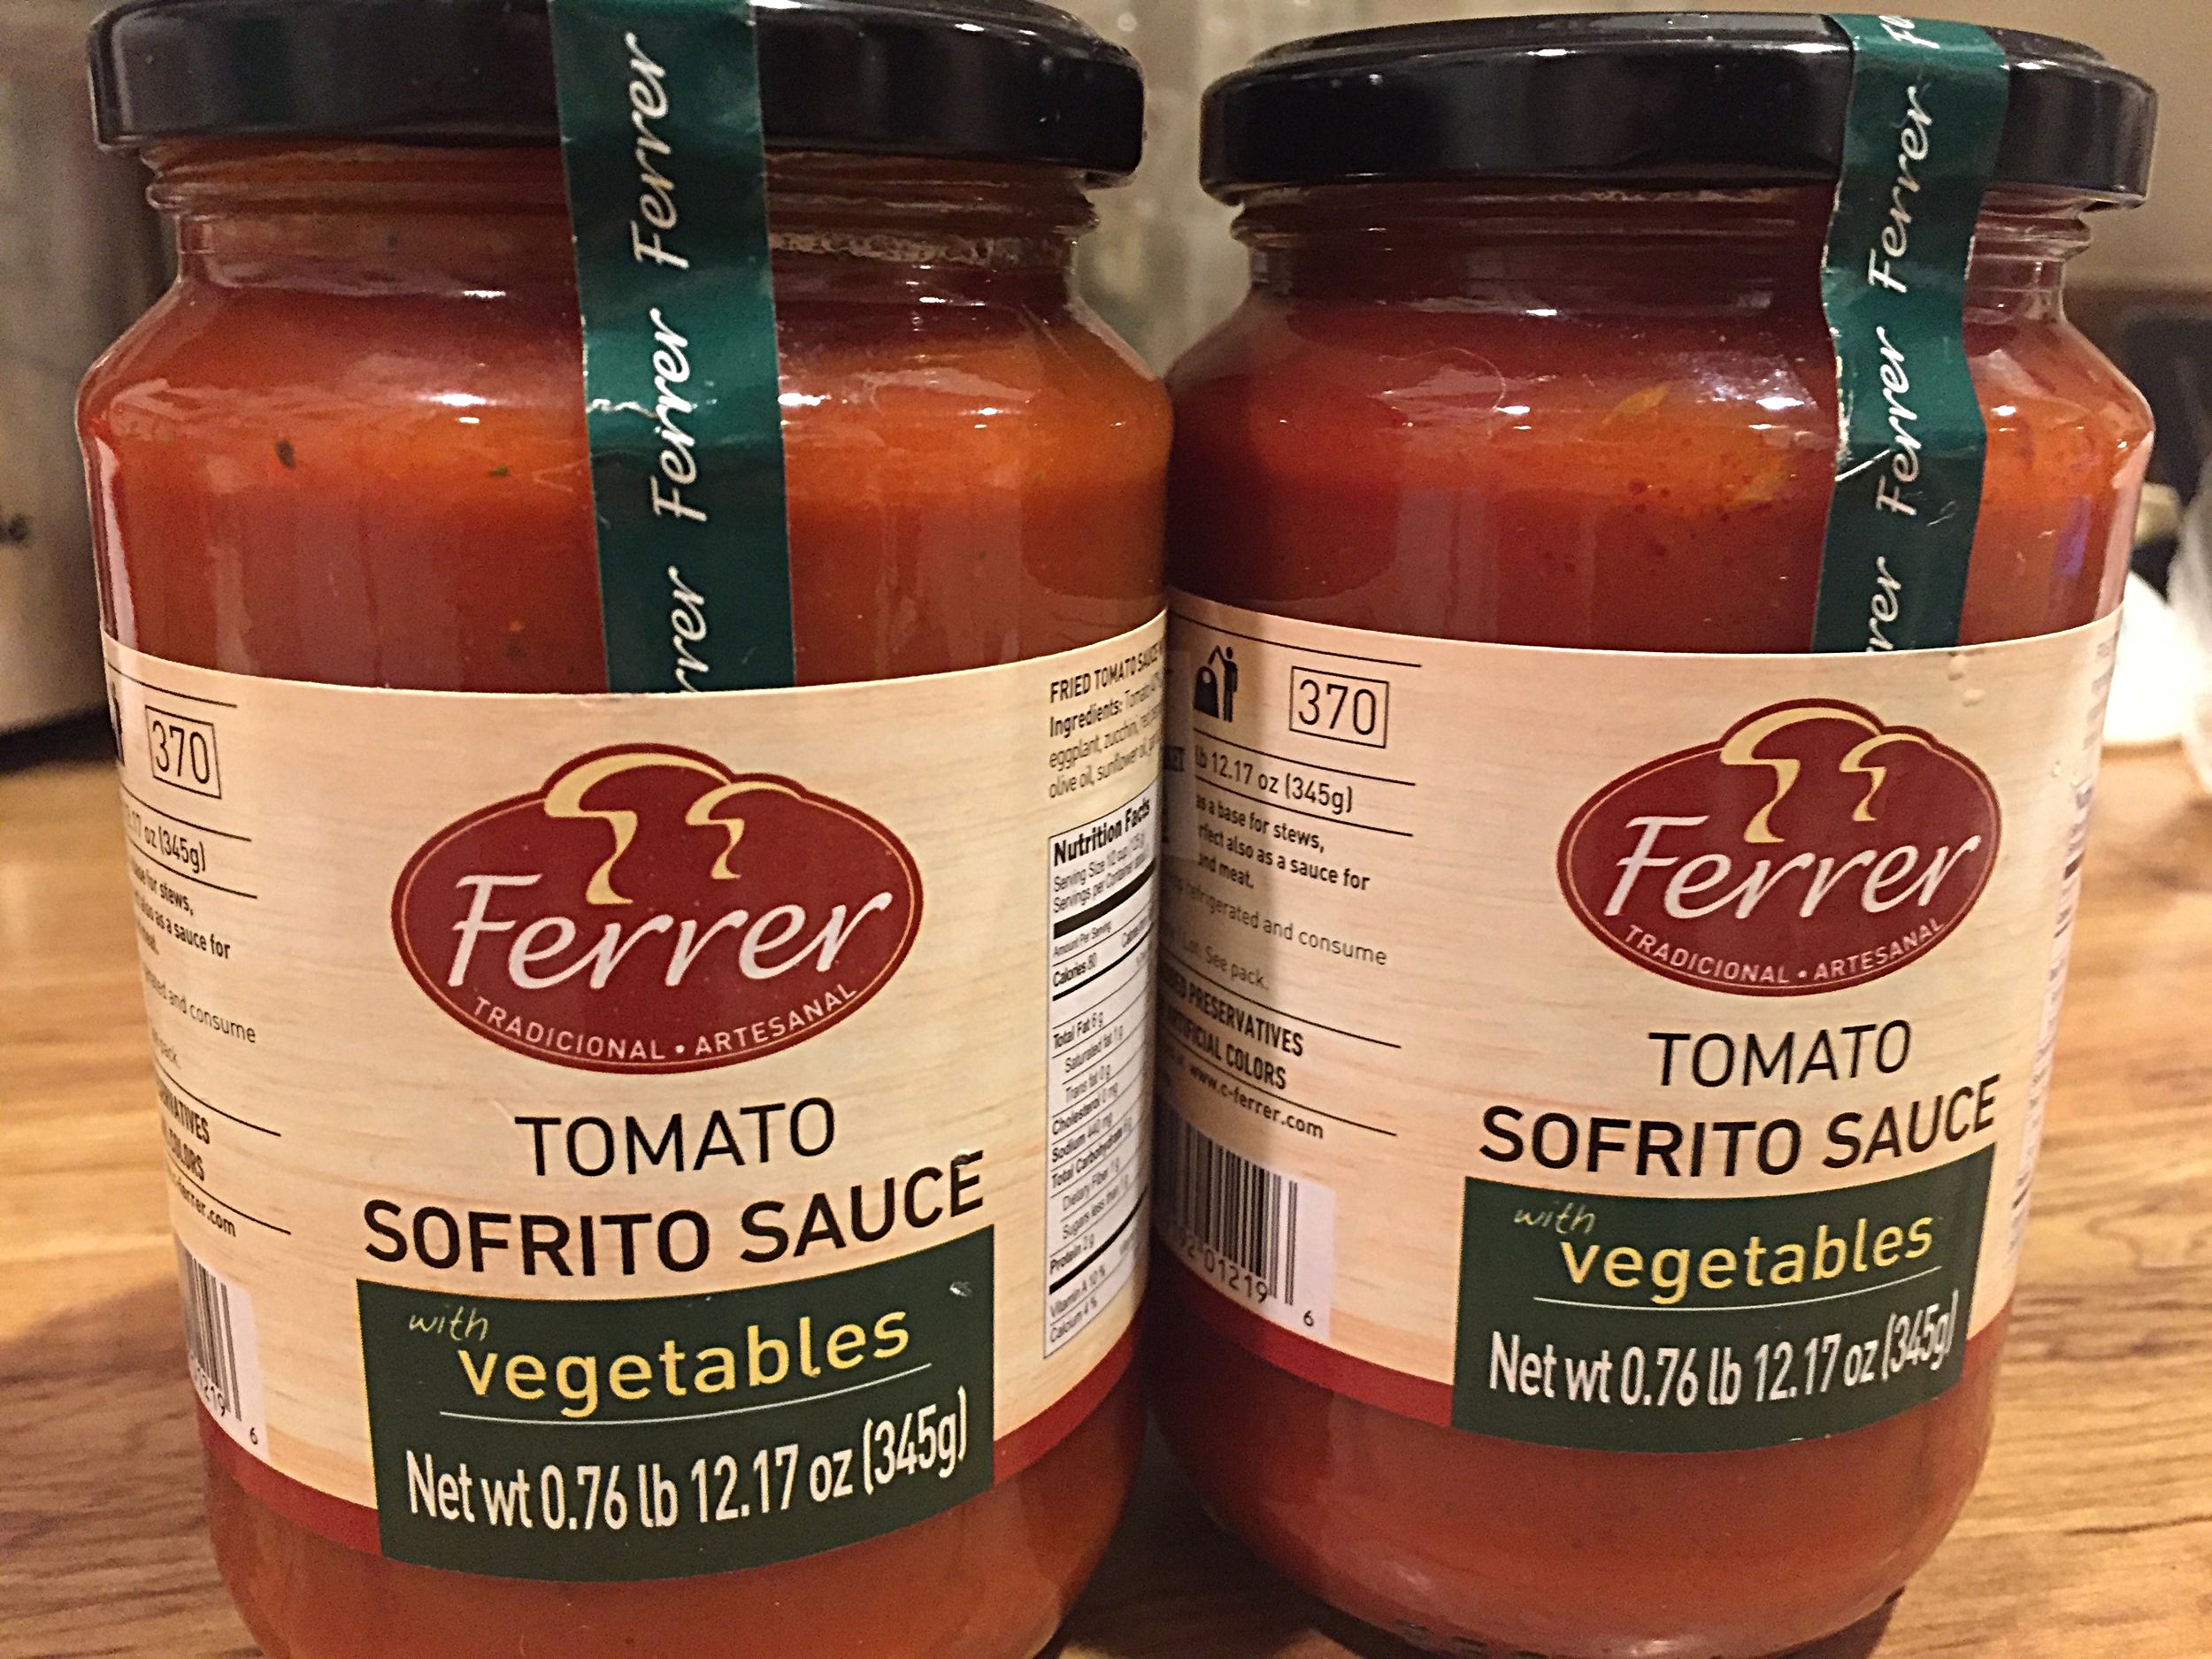 Ferrer Tomato Sofrito Sauce with Vegetables